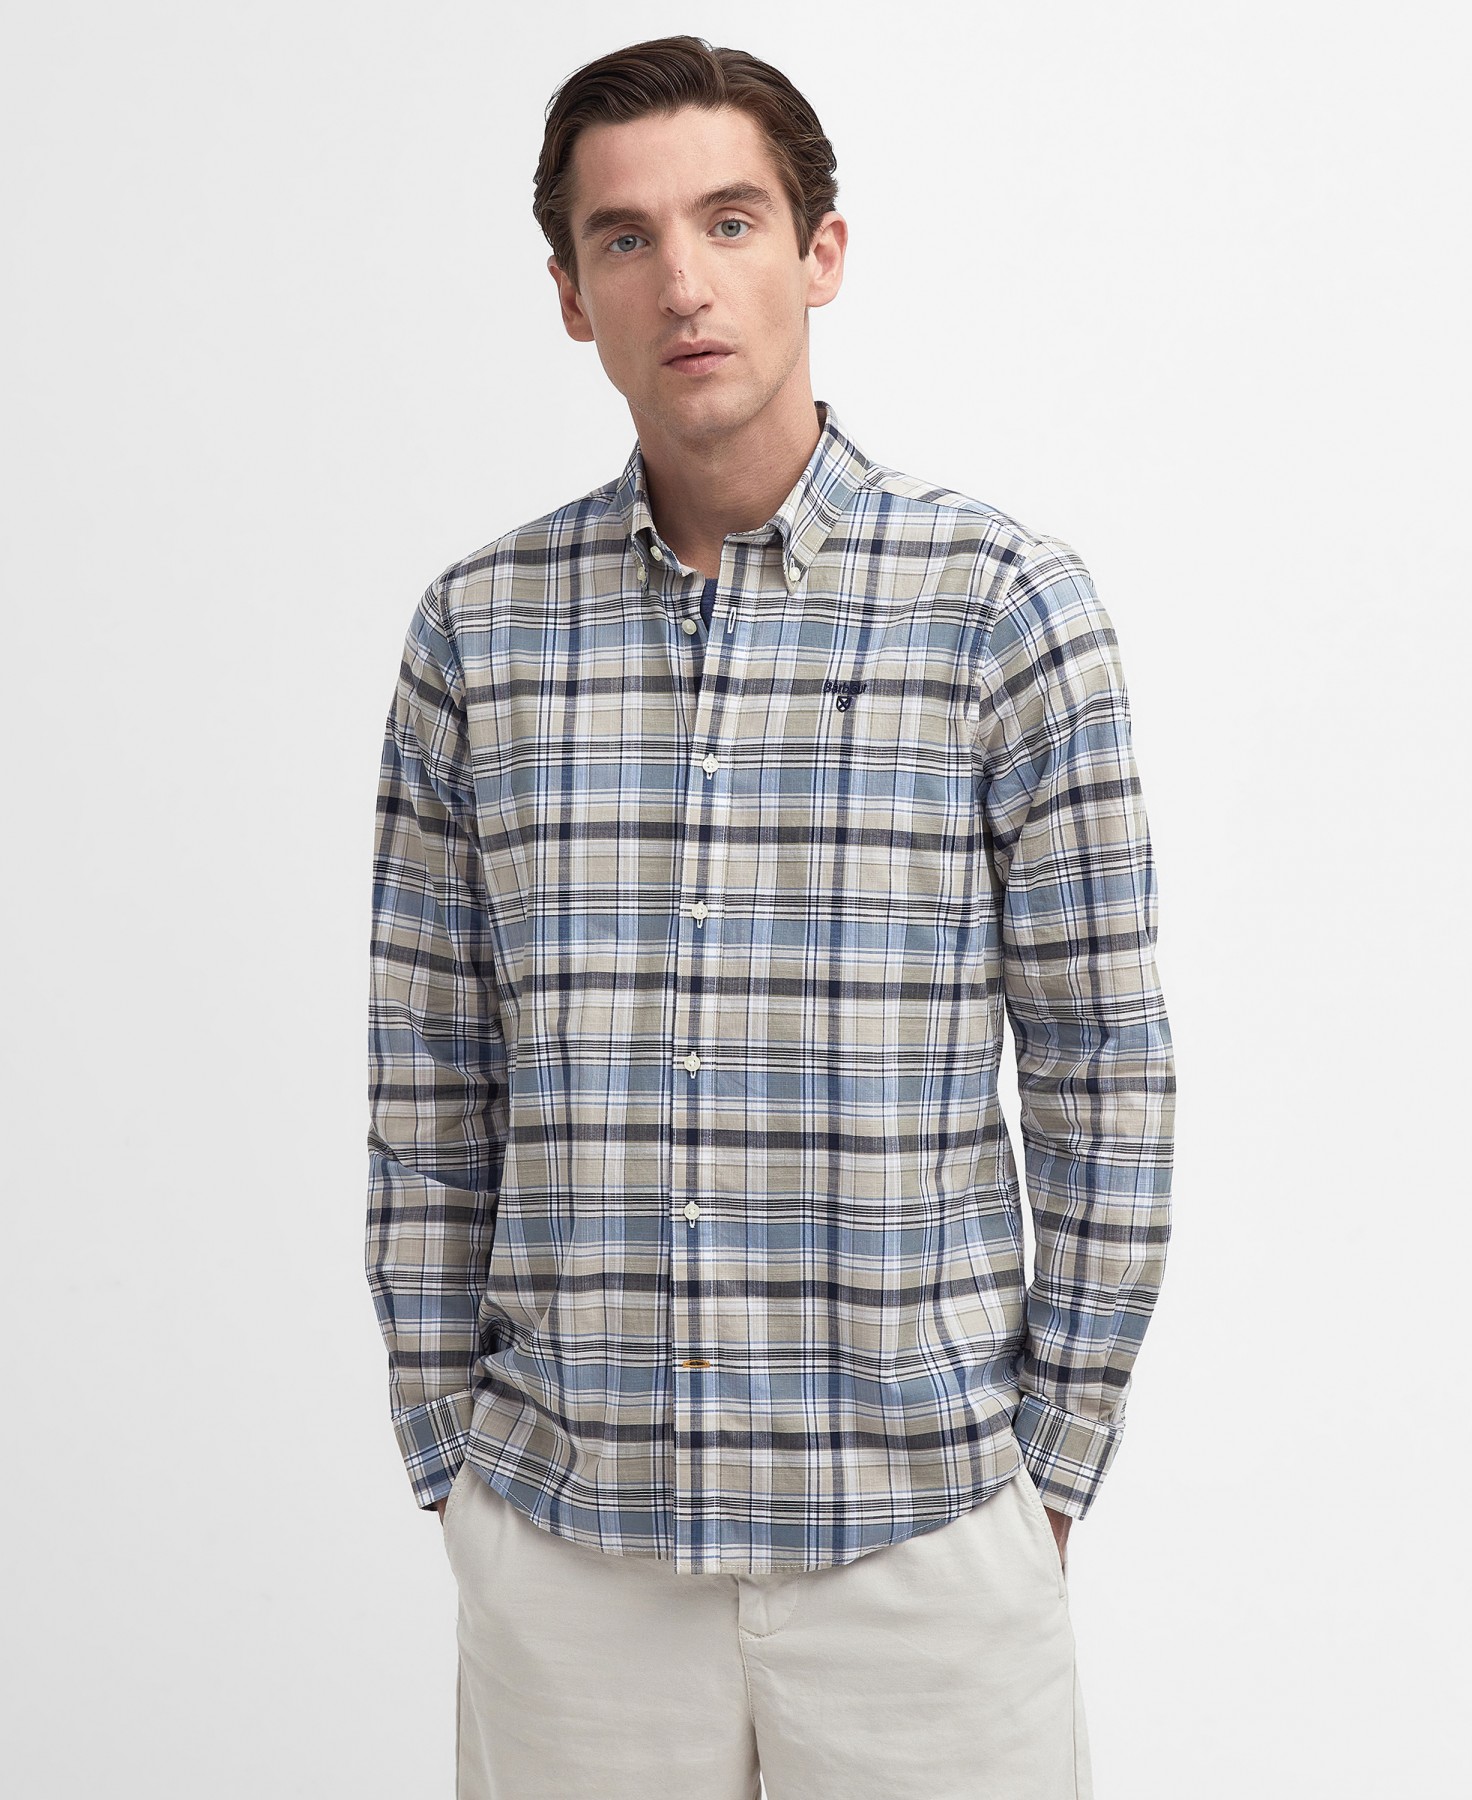 Barbour Checked Hutton Tailored Shirt - Stone